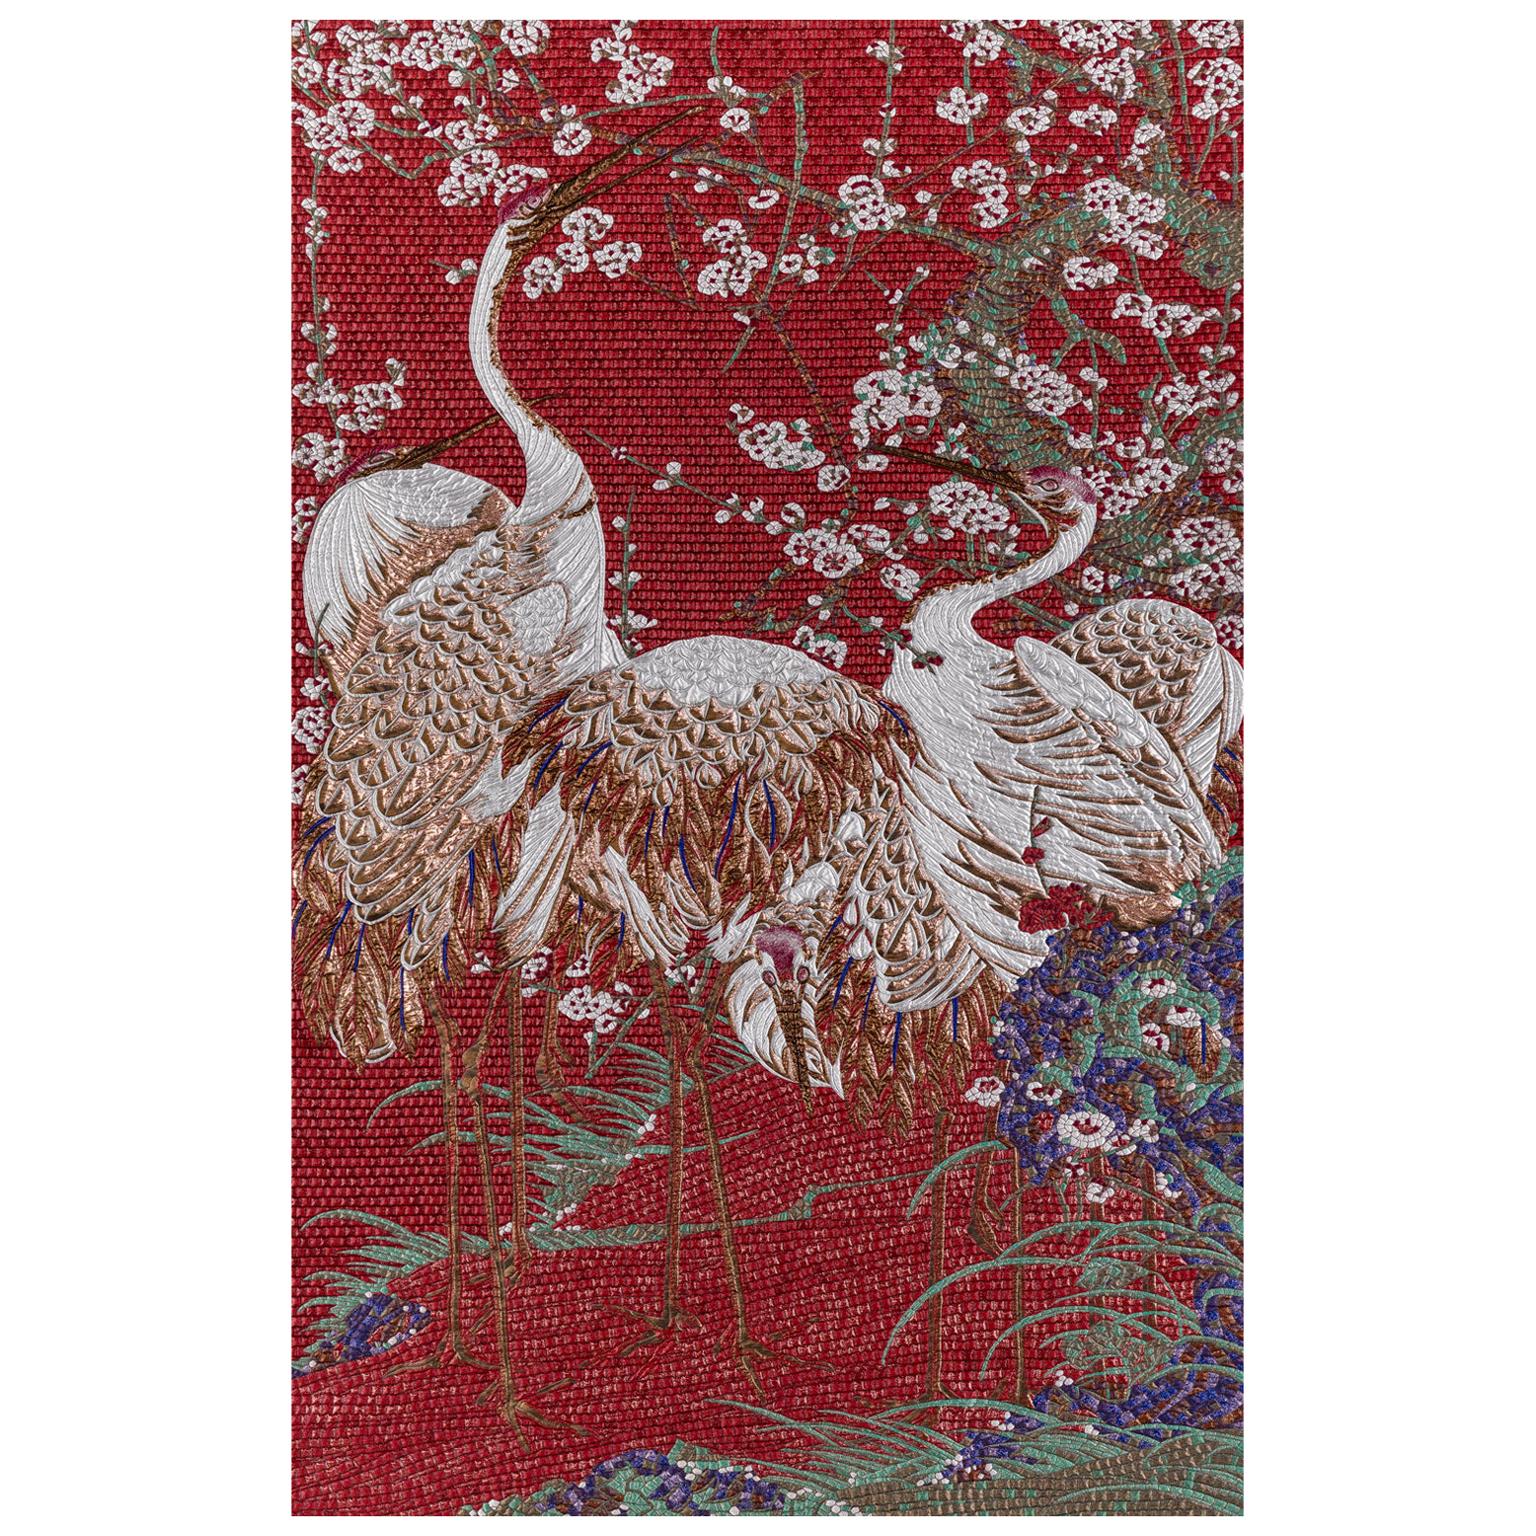 Fabric Tapestry with Heron Design Upholstered Panel on Demand